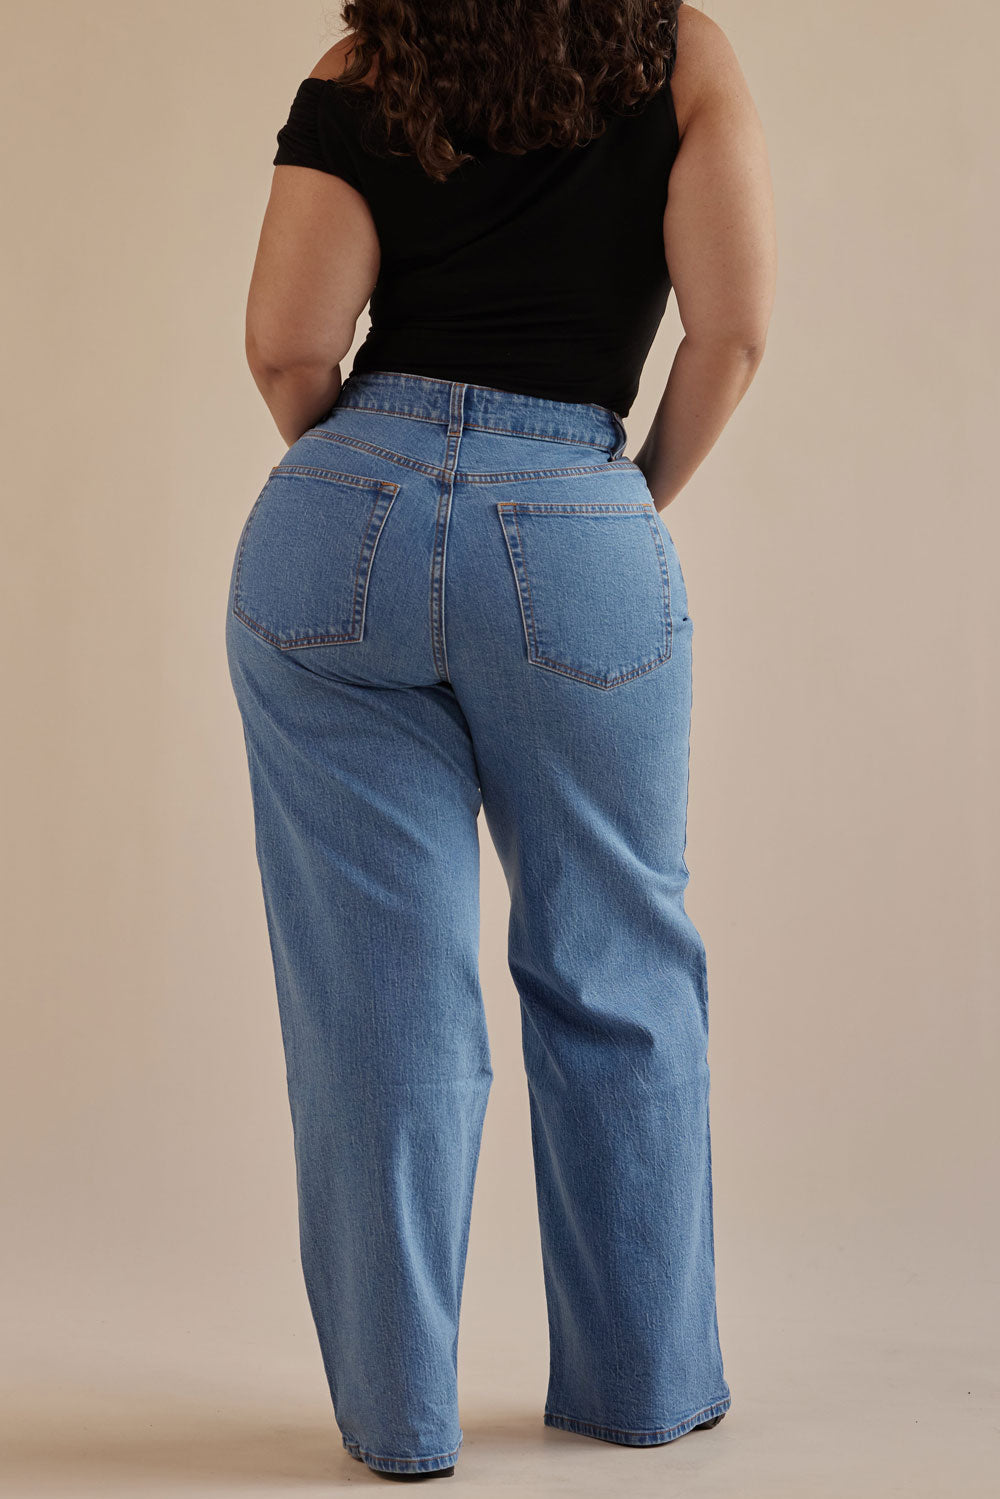 Plus Size Shaping Jeans, Shaper Jeans